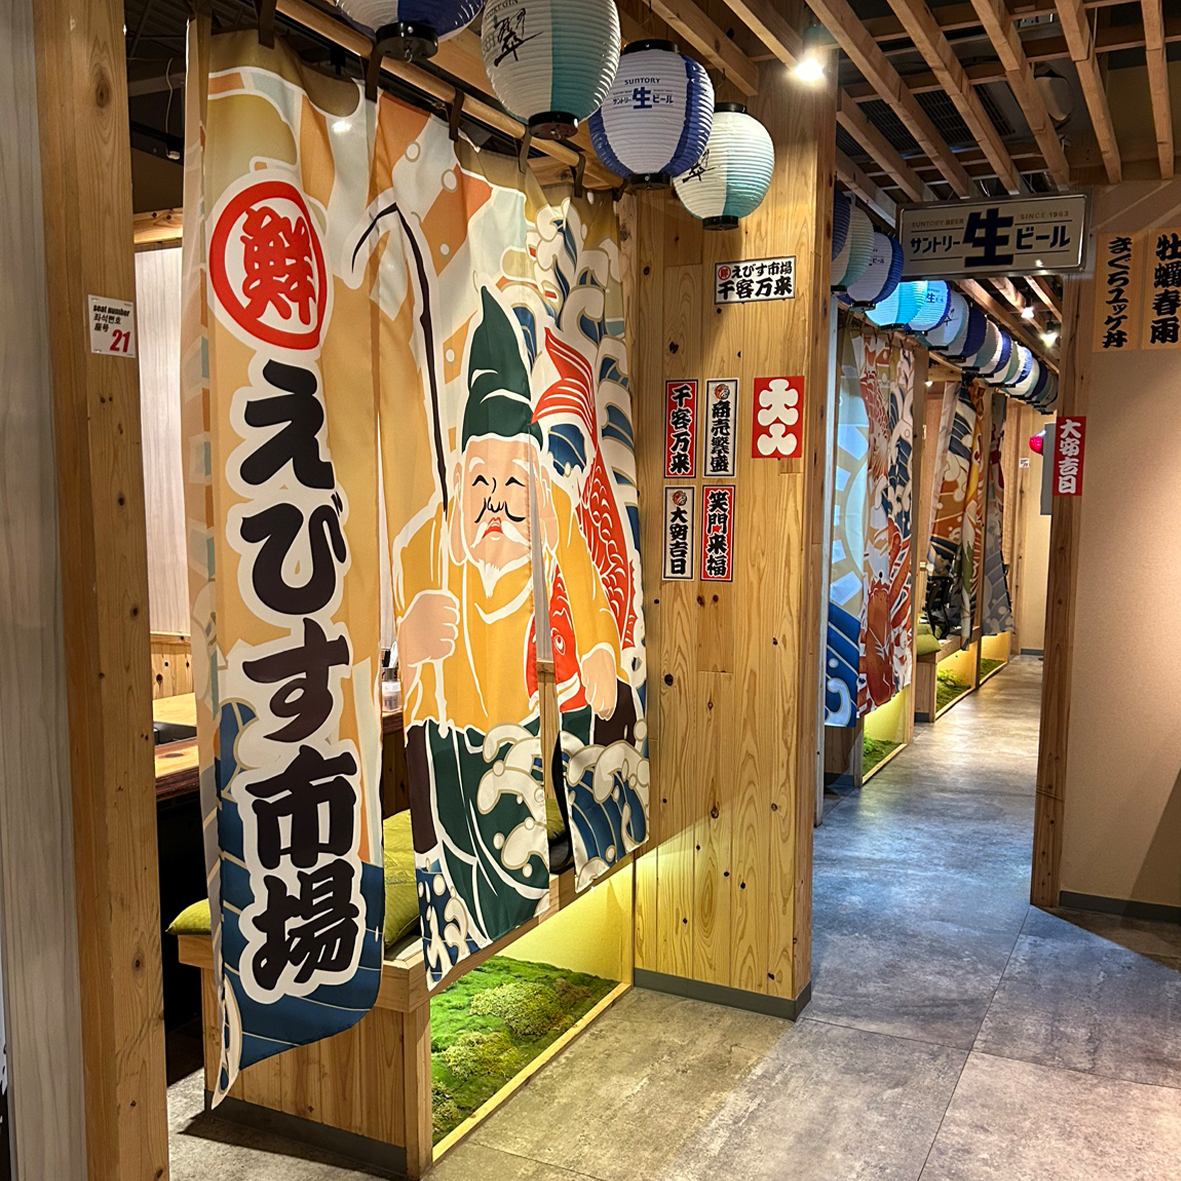 Semi-private rooms available! Ebisu Market will create a special time for 3-4 people!